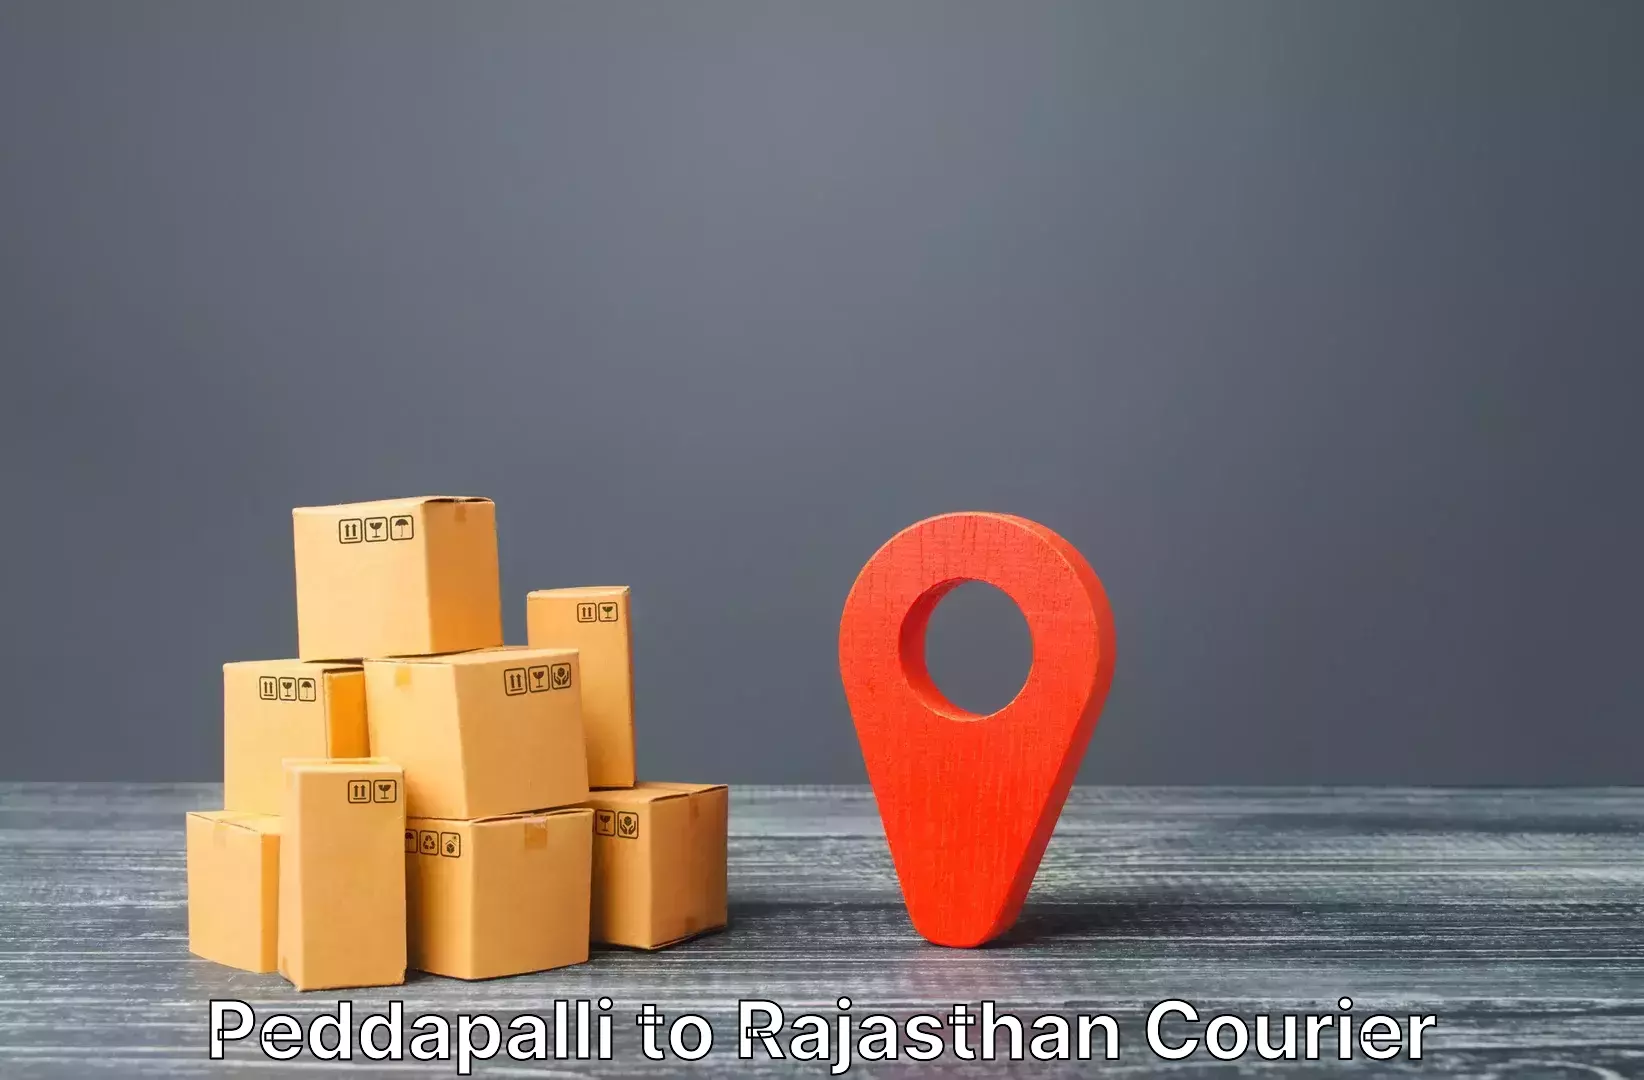 Luggage delivery providers in Peddapalli to Rajasthan